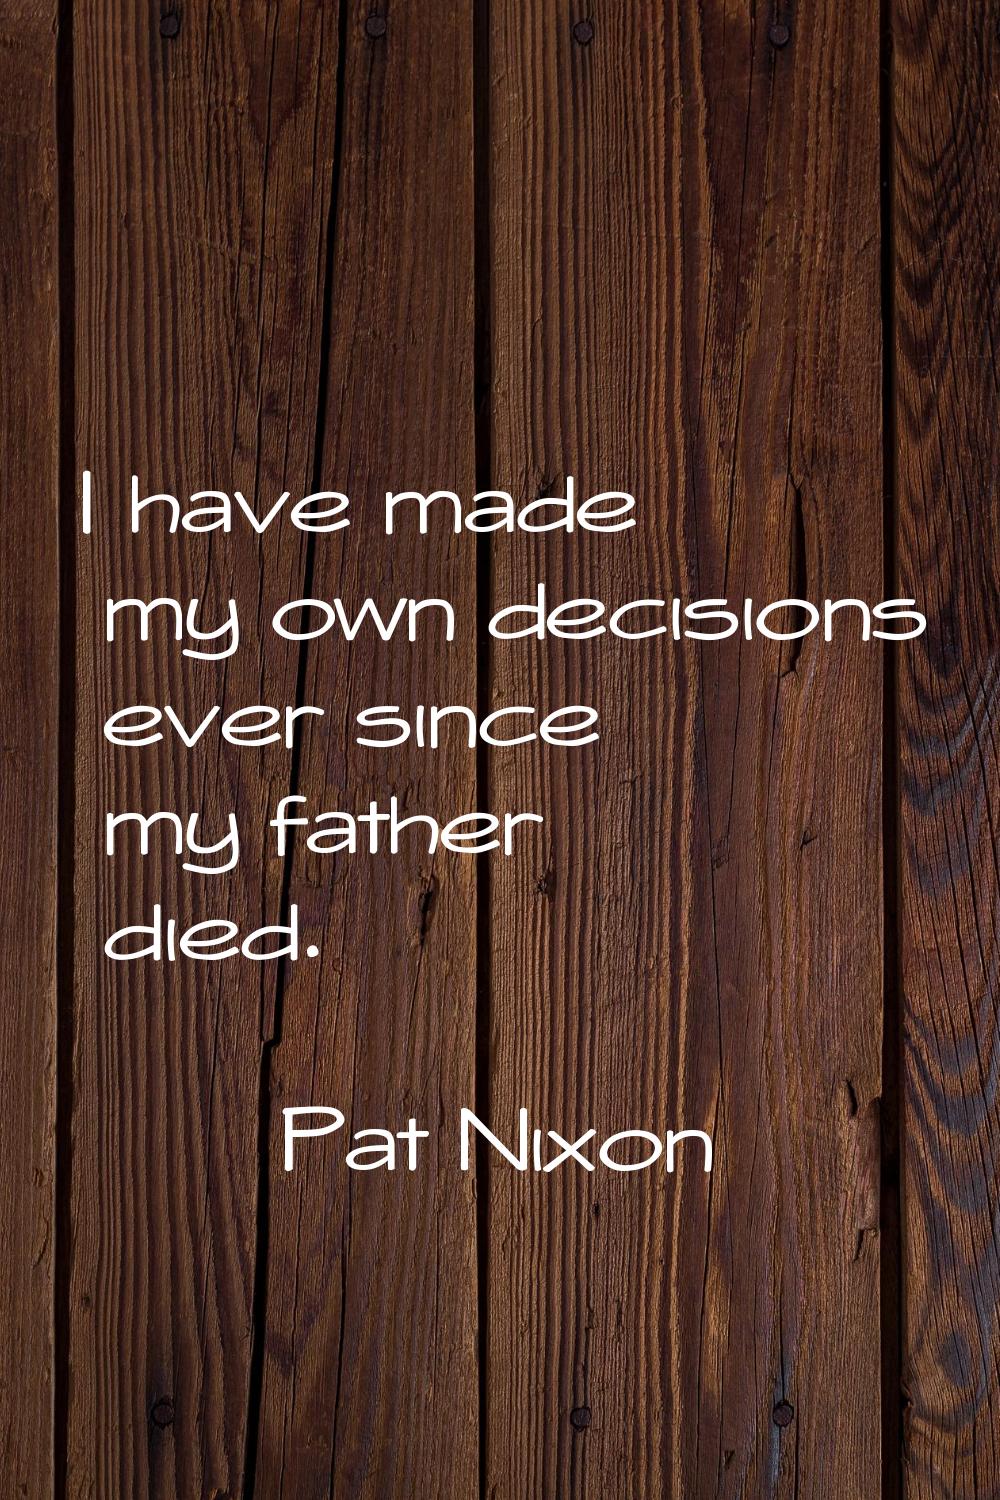 I have made my own decisions ever since my father died.